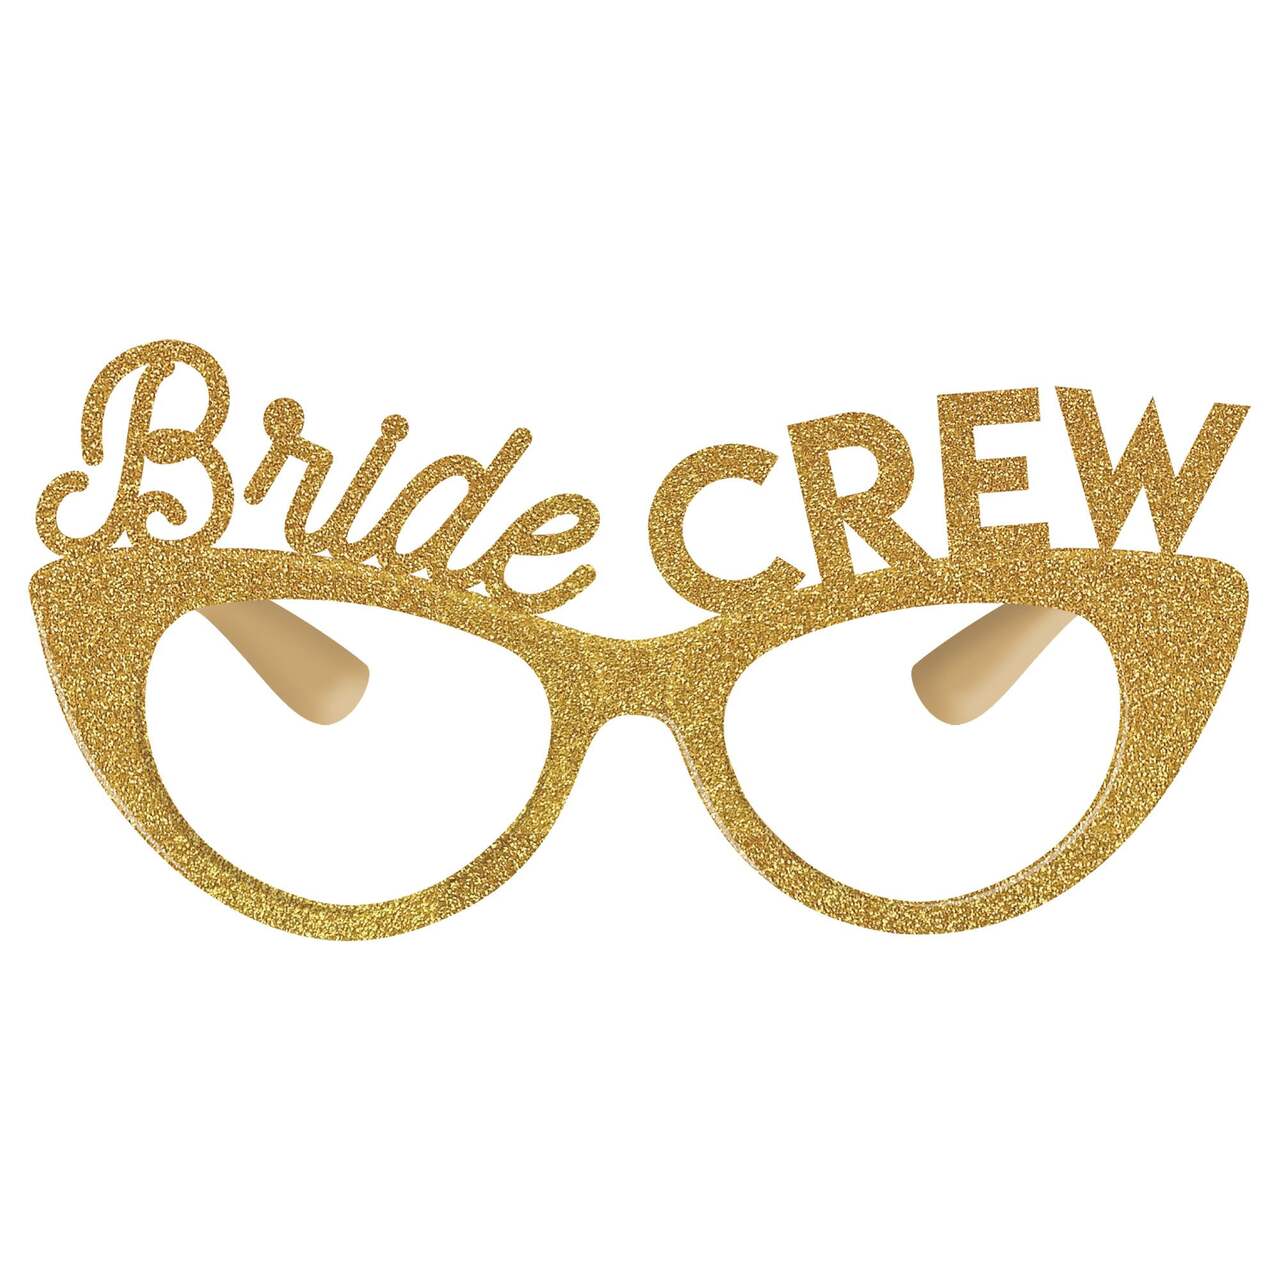 Bride Crew Cat Eye Shaped Glitter Eyeglasses, Gold, One Size, Wearable  Accessory for Wedding Shower/Bachelorette Party